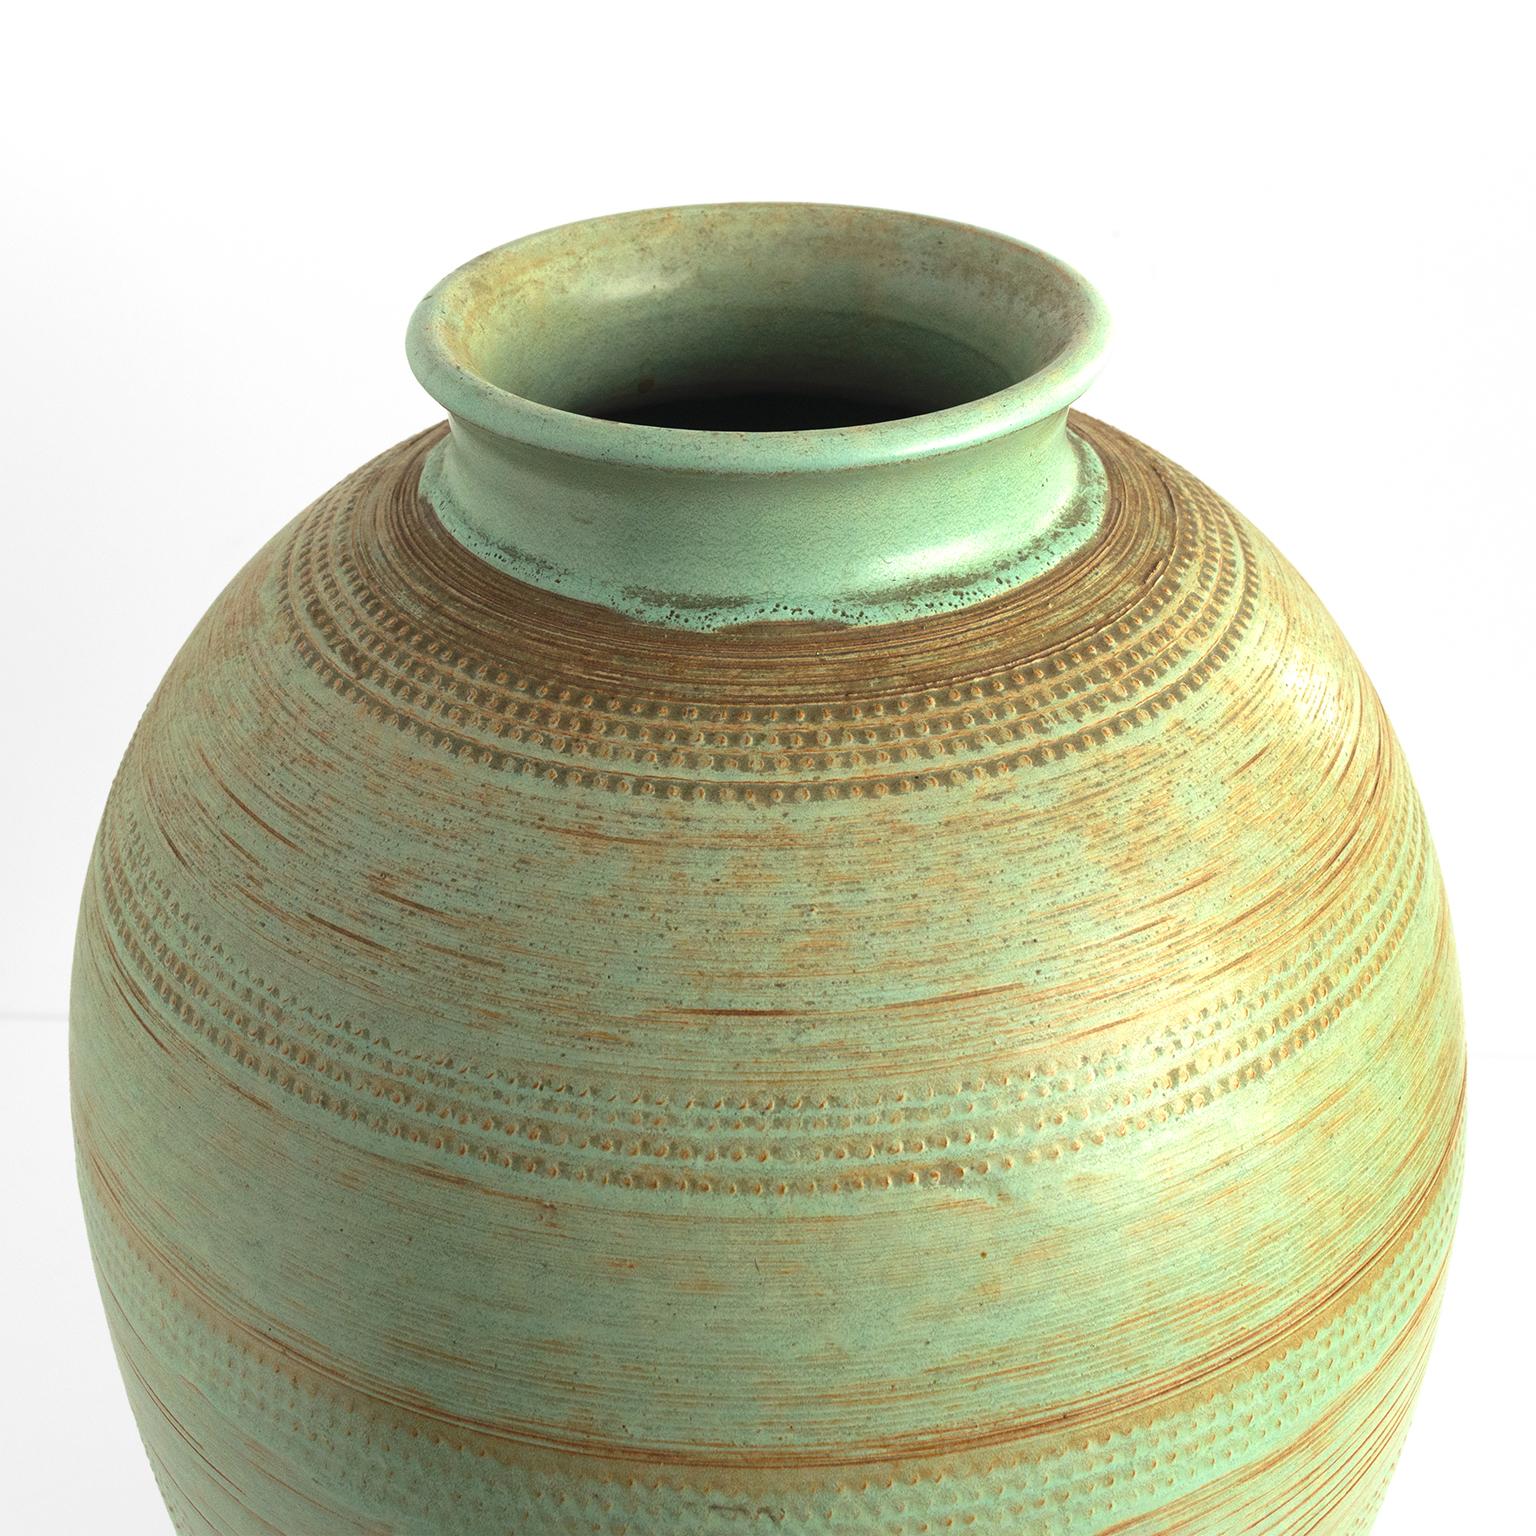 Hand-Crafted Andersson & Johansson, Höganäs, Large Ceramic Vase in Green 1940'S, Sweden For Sale